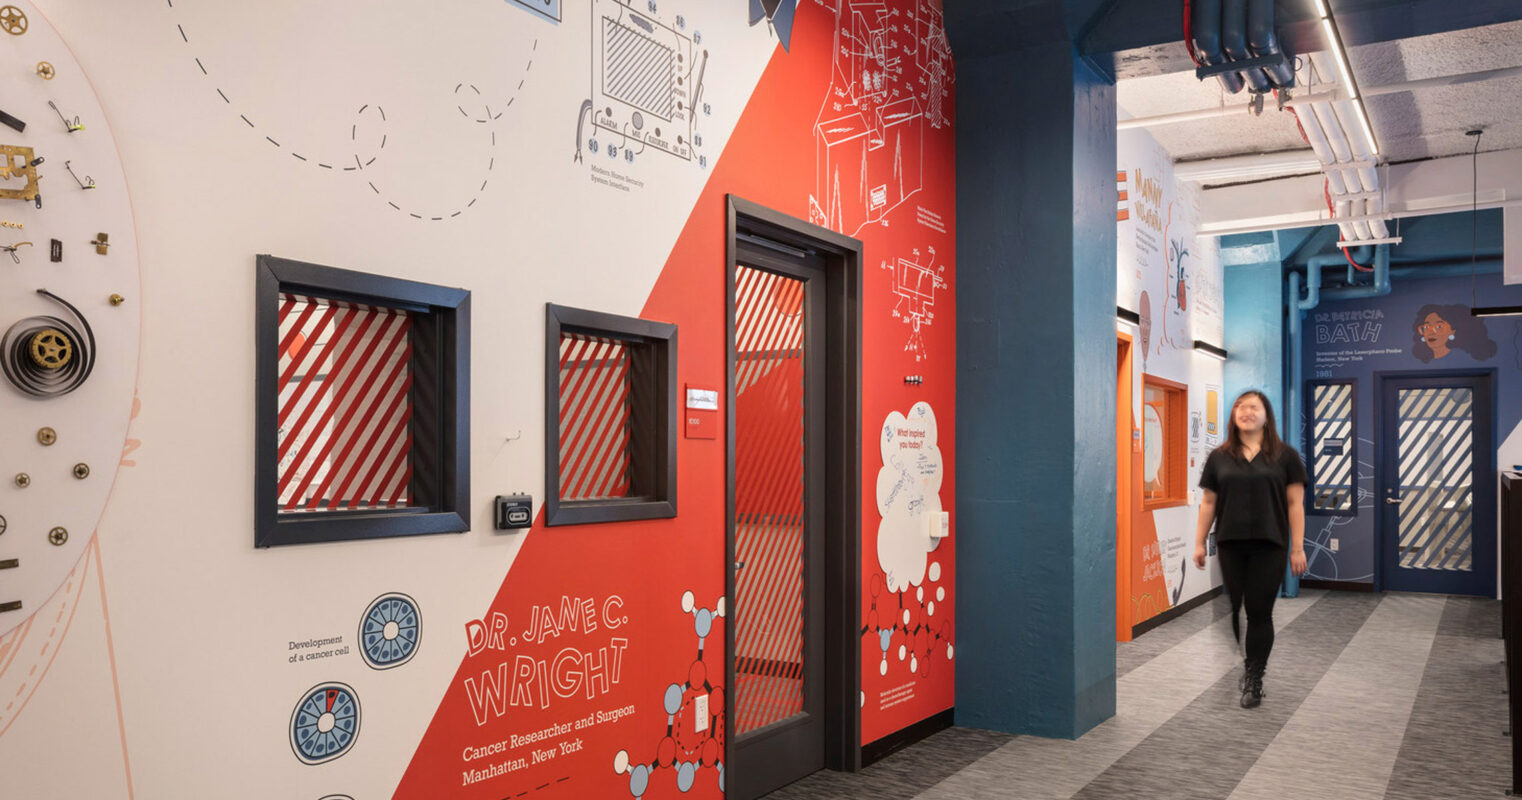 Vibrantly themed educational corridor with interactive walls featuring timelines and illustrations, contrasted by industrial ceiling elements and minimalist lighting, inviting active learning and engagement.